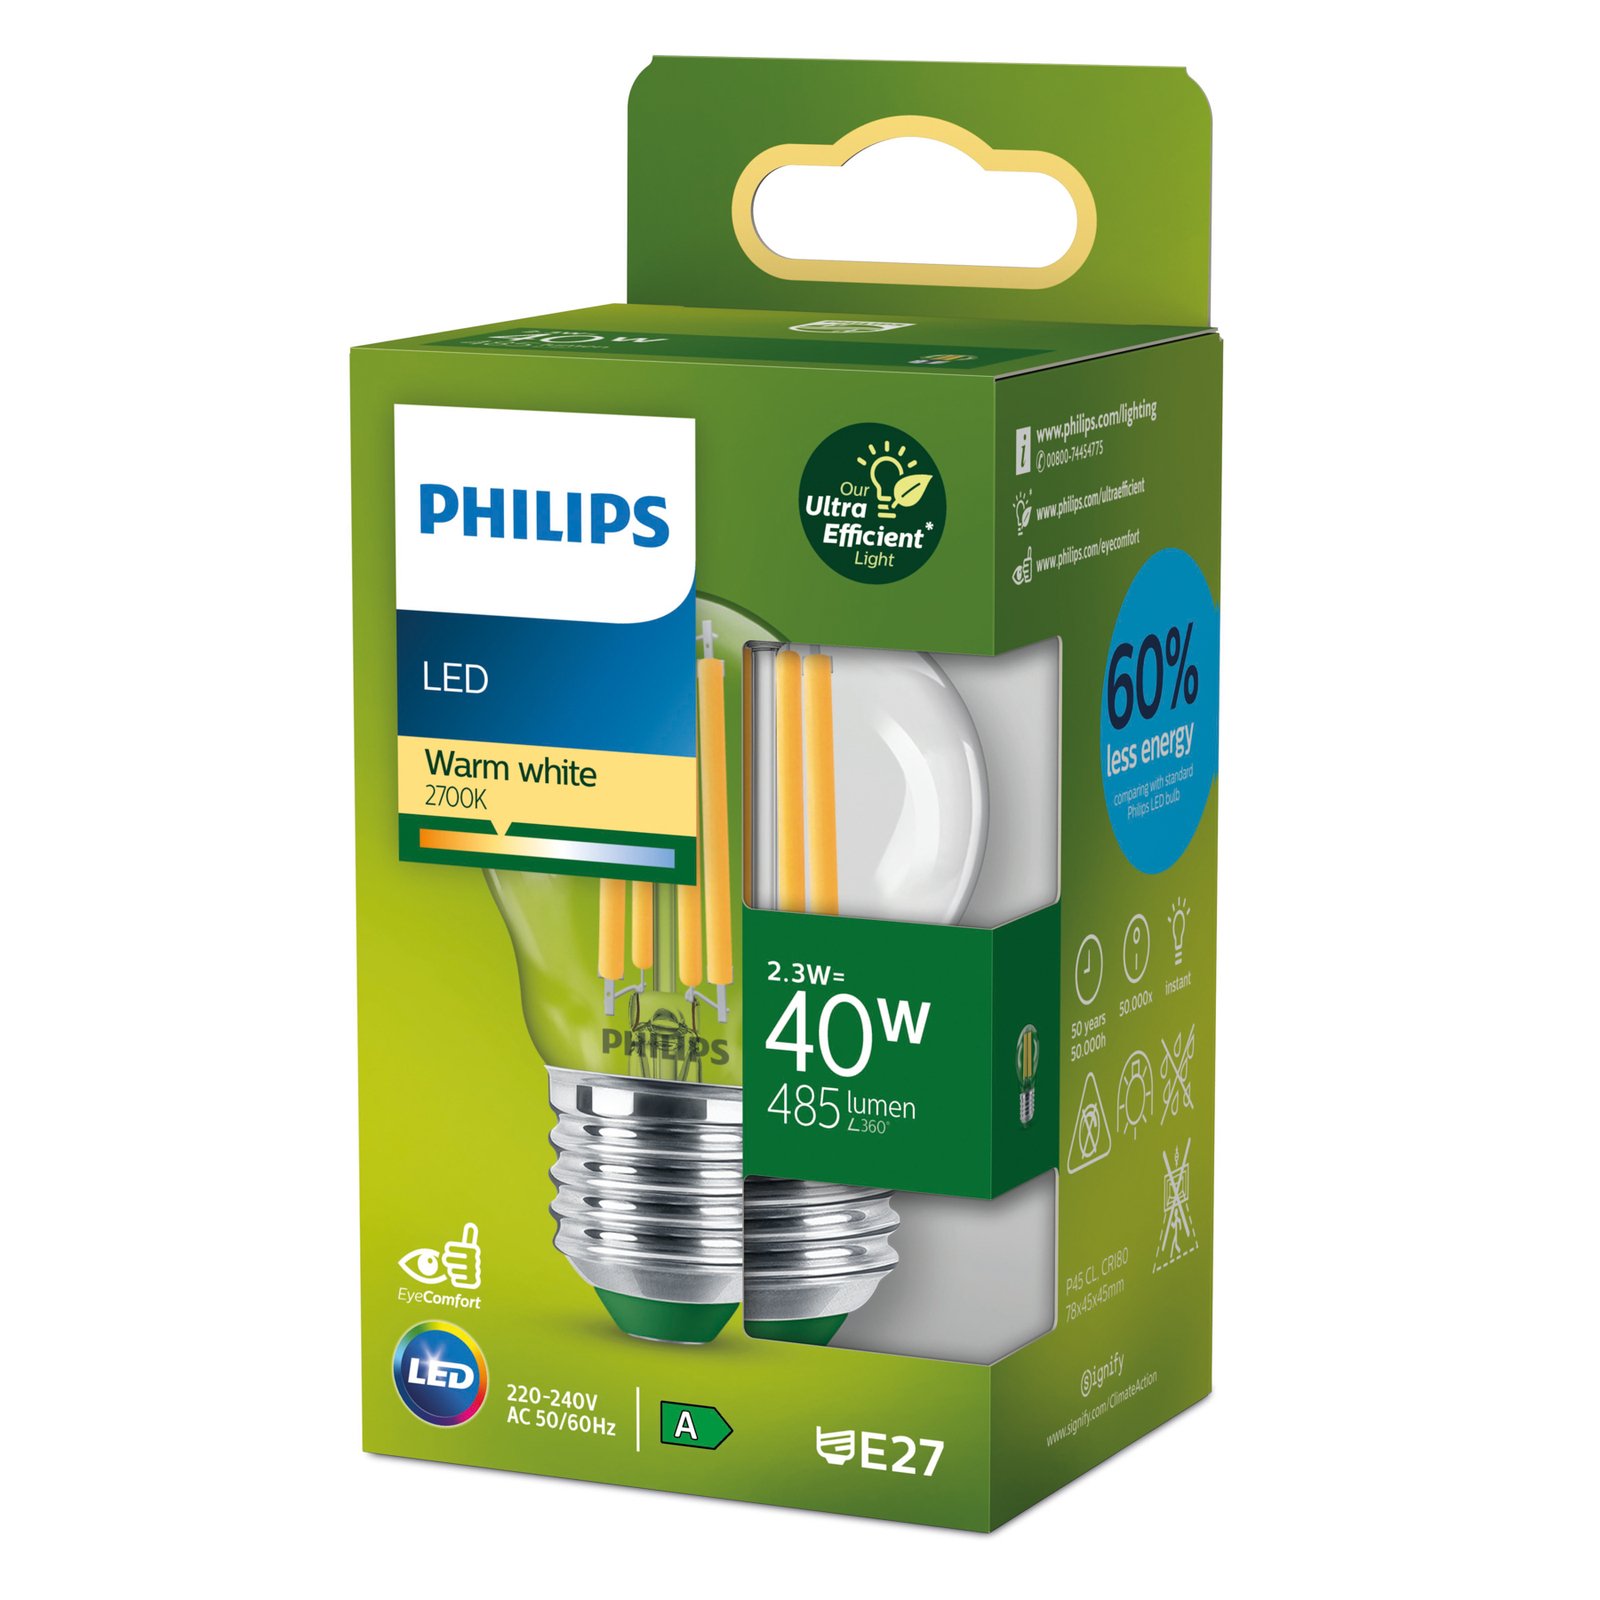 Philips E27 LED G45 2,3W 485lm 2 700K claire